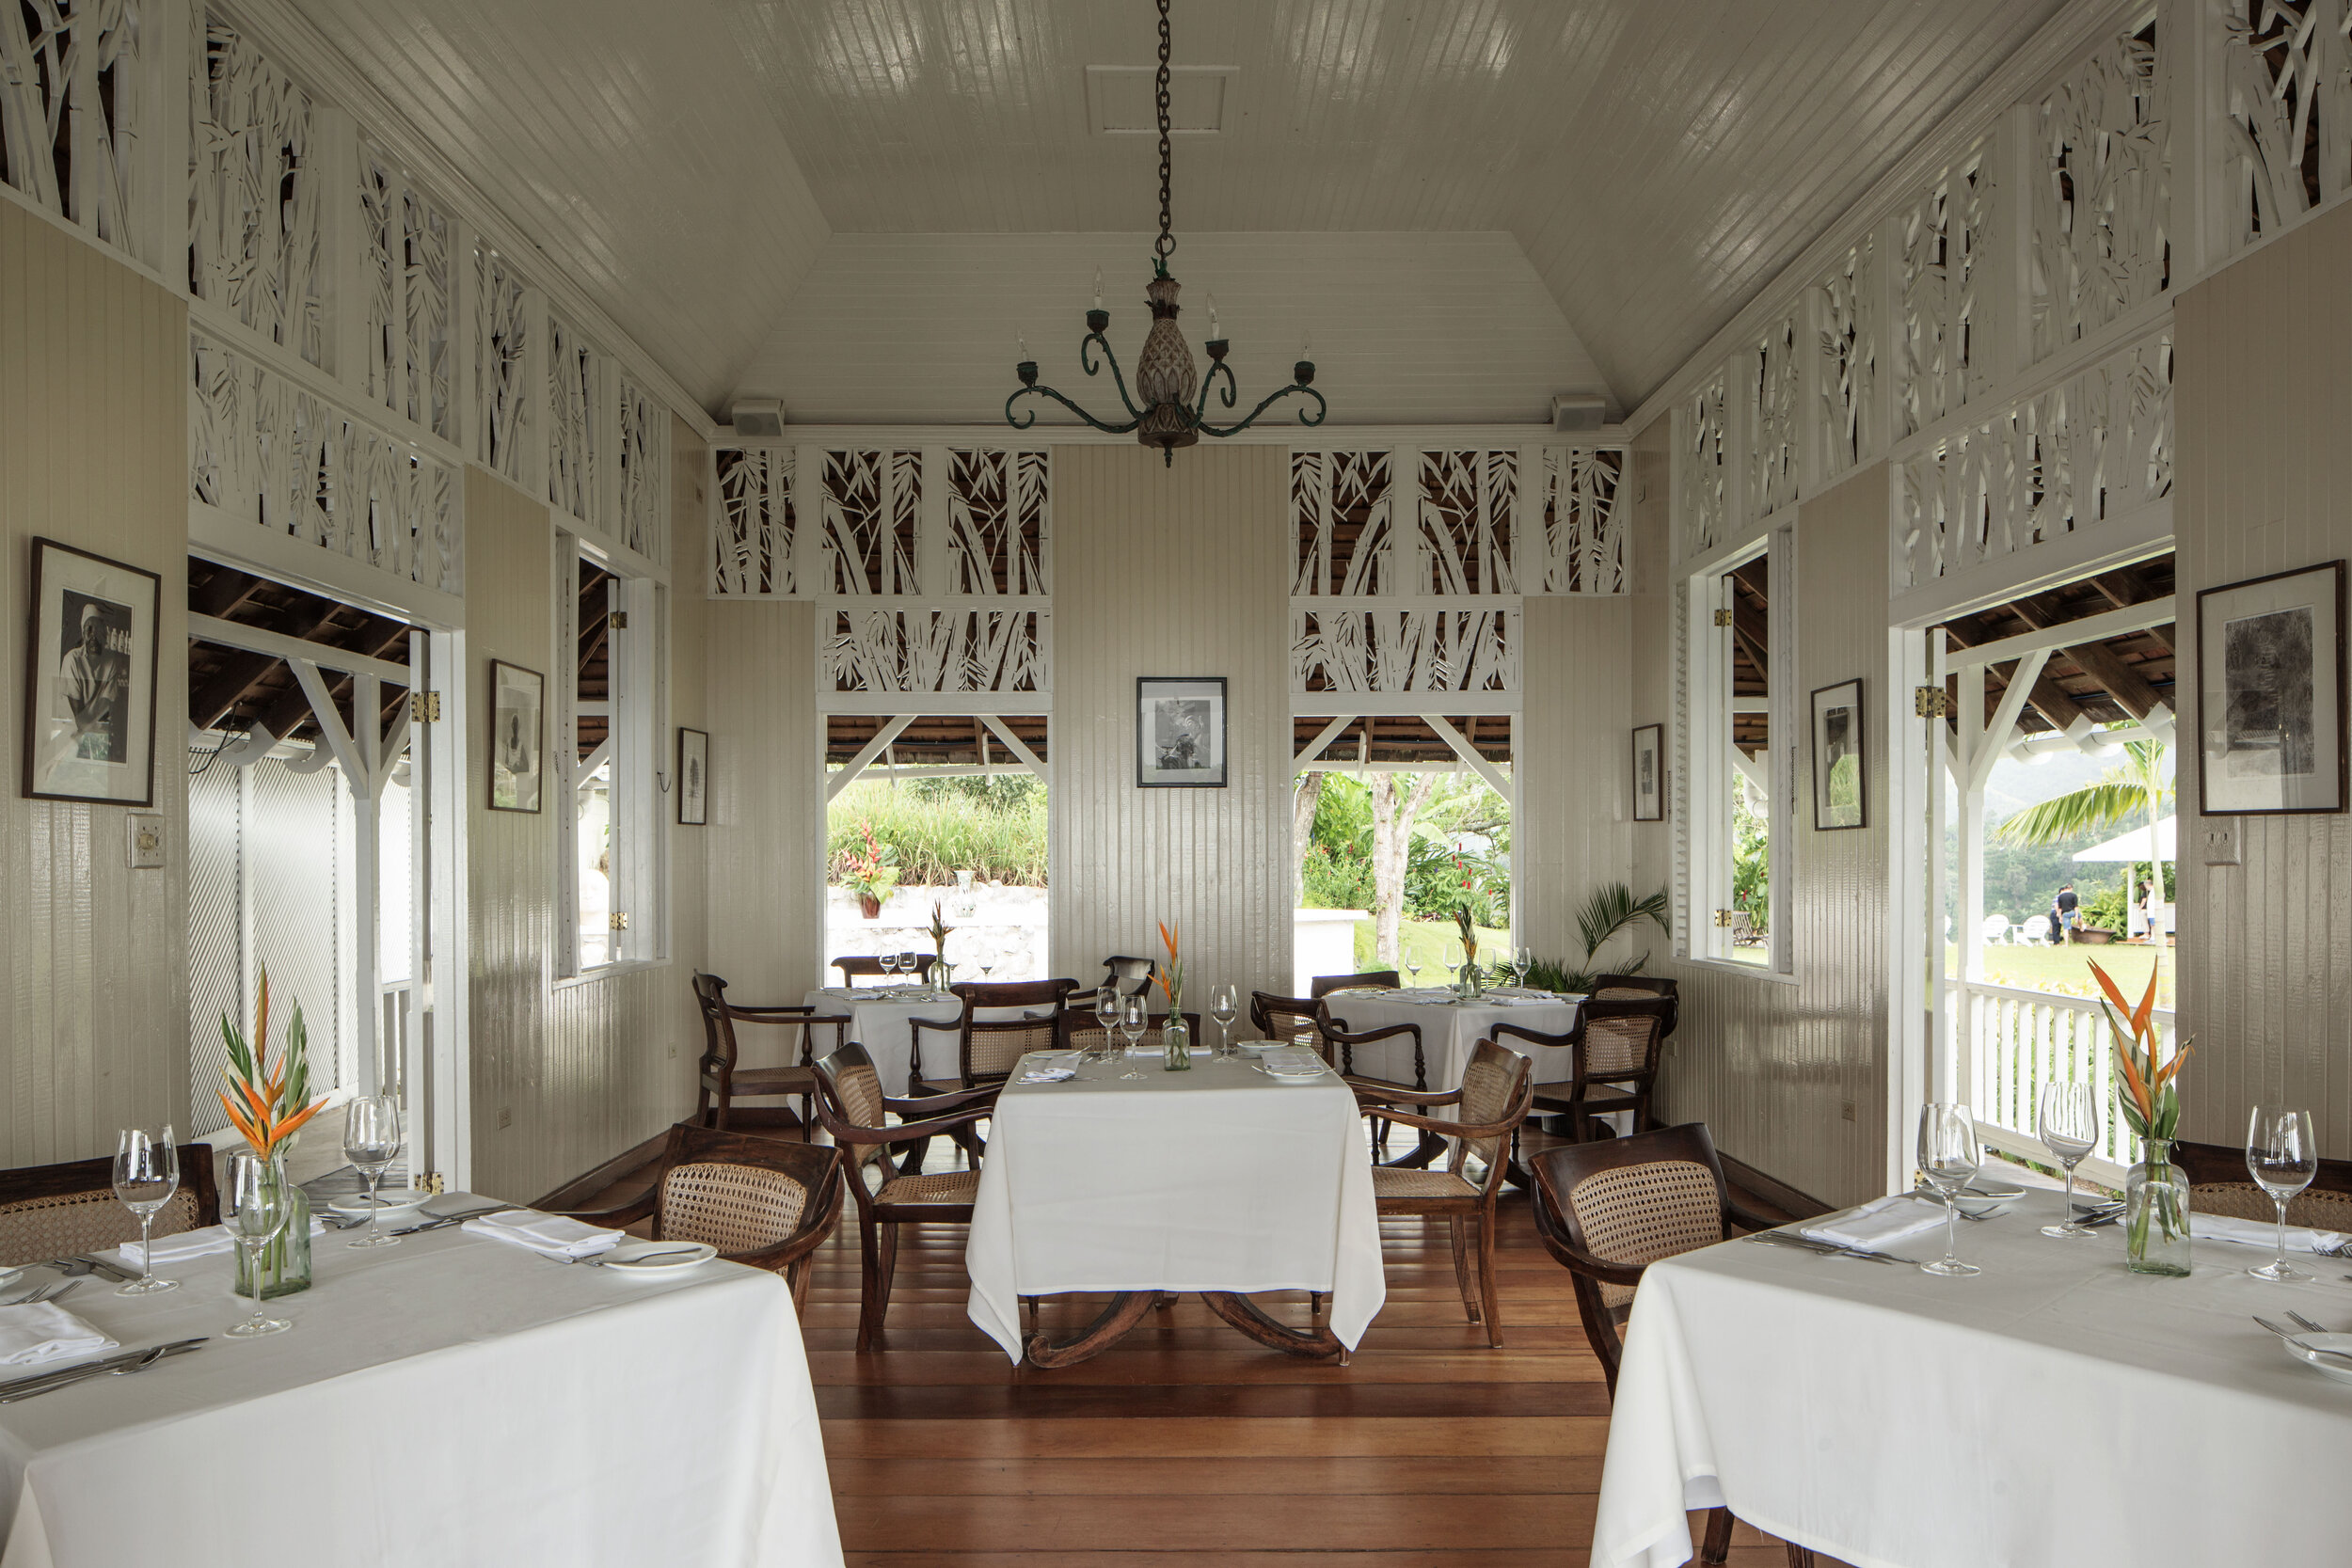   The restaurant at Strawberry Hill (photo credit: Dominique DeBay Collection)  